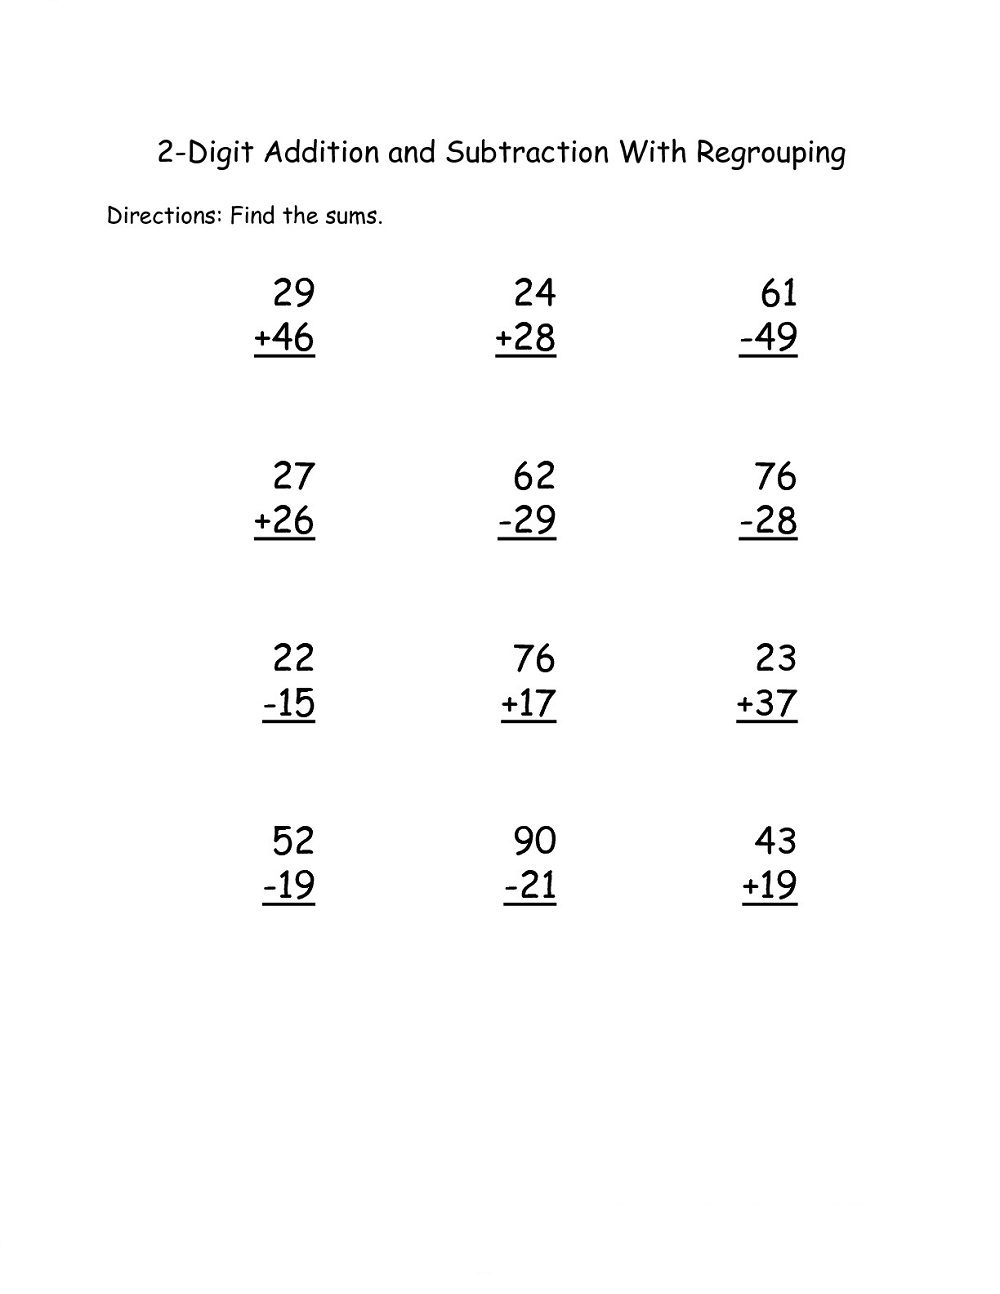 additions and subtraction worksheets 2 digits